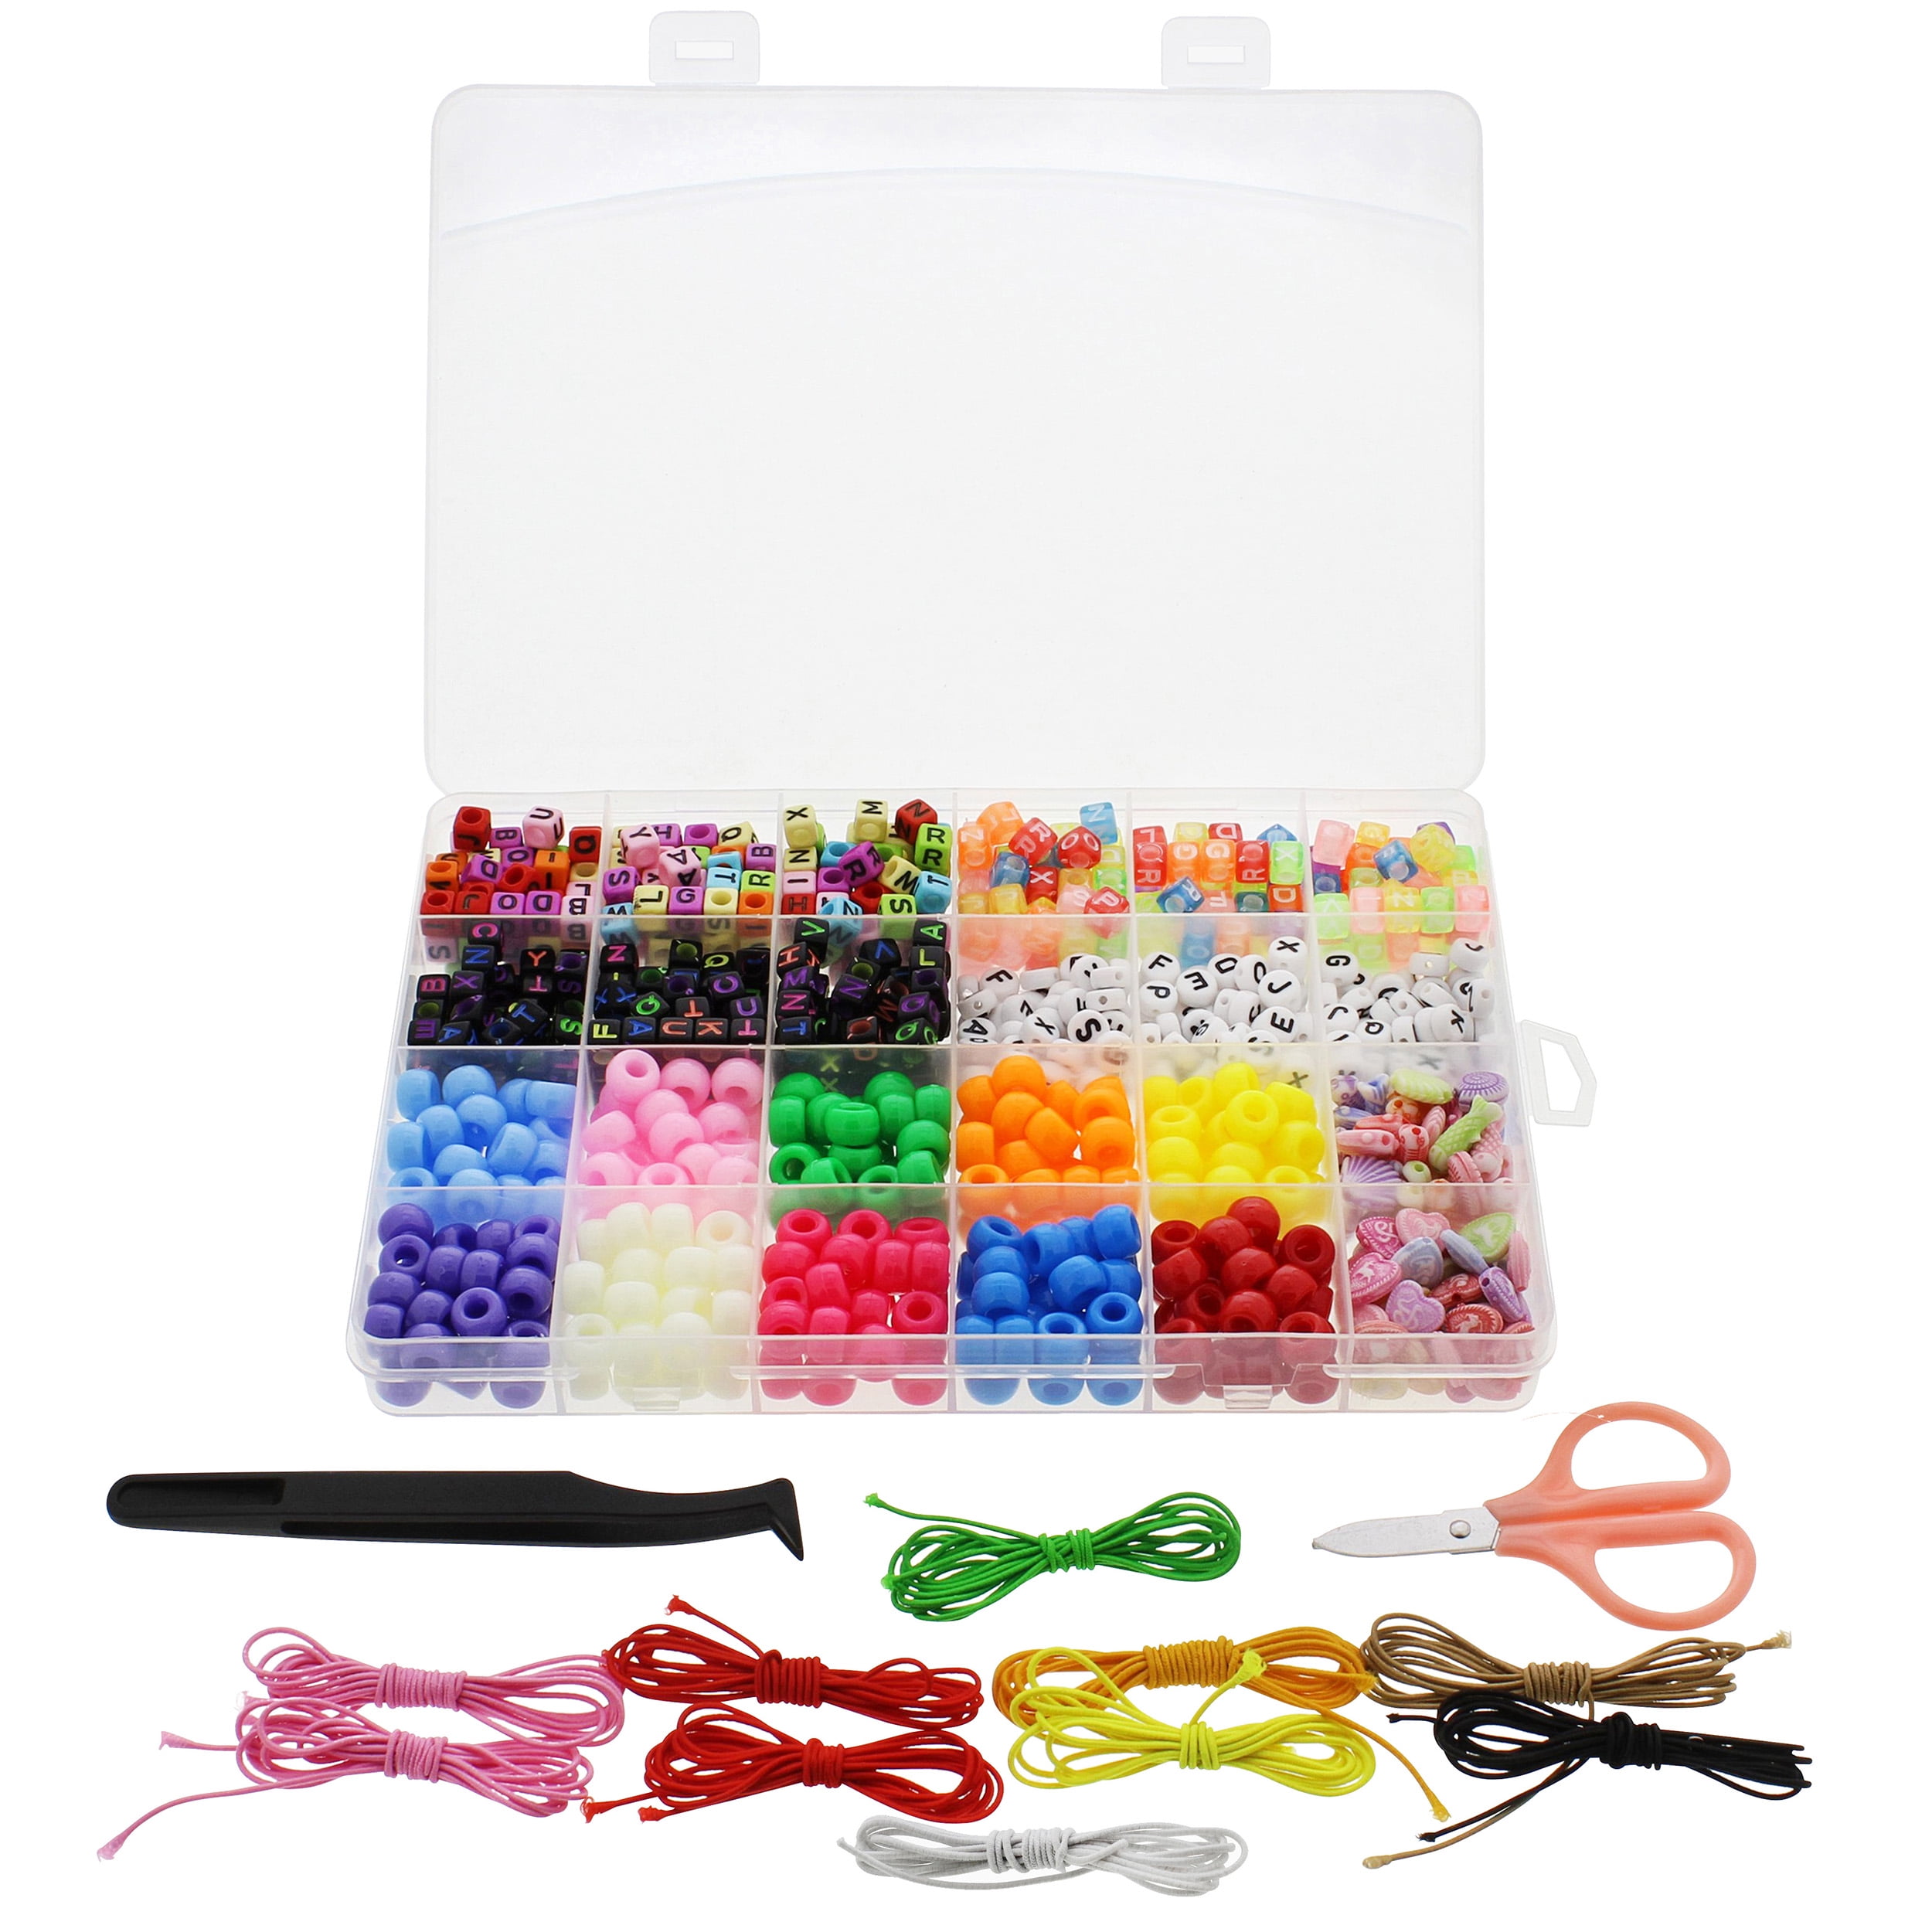  Just My Style Fashion Punch Style & Stitch Loom, Friendship  Bracelet Kit, Jewelry Making Activity, Great for Birthday Parties,  Sleepovers & Travel, Arts & Crafts for Kids Ages 6, 7, 8